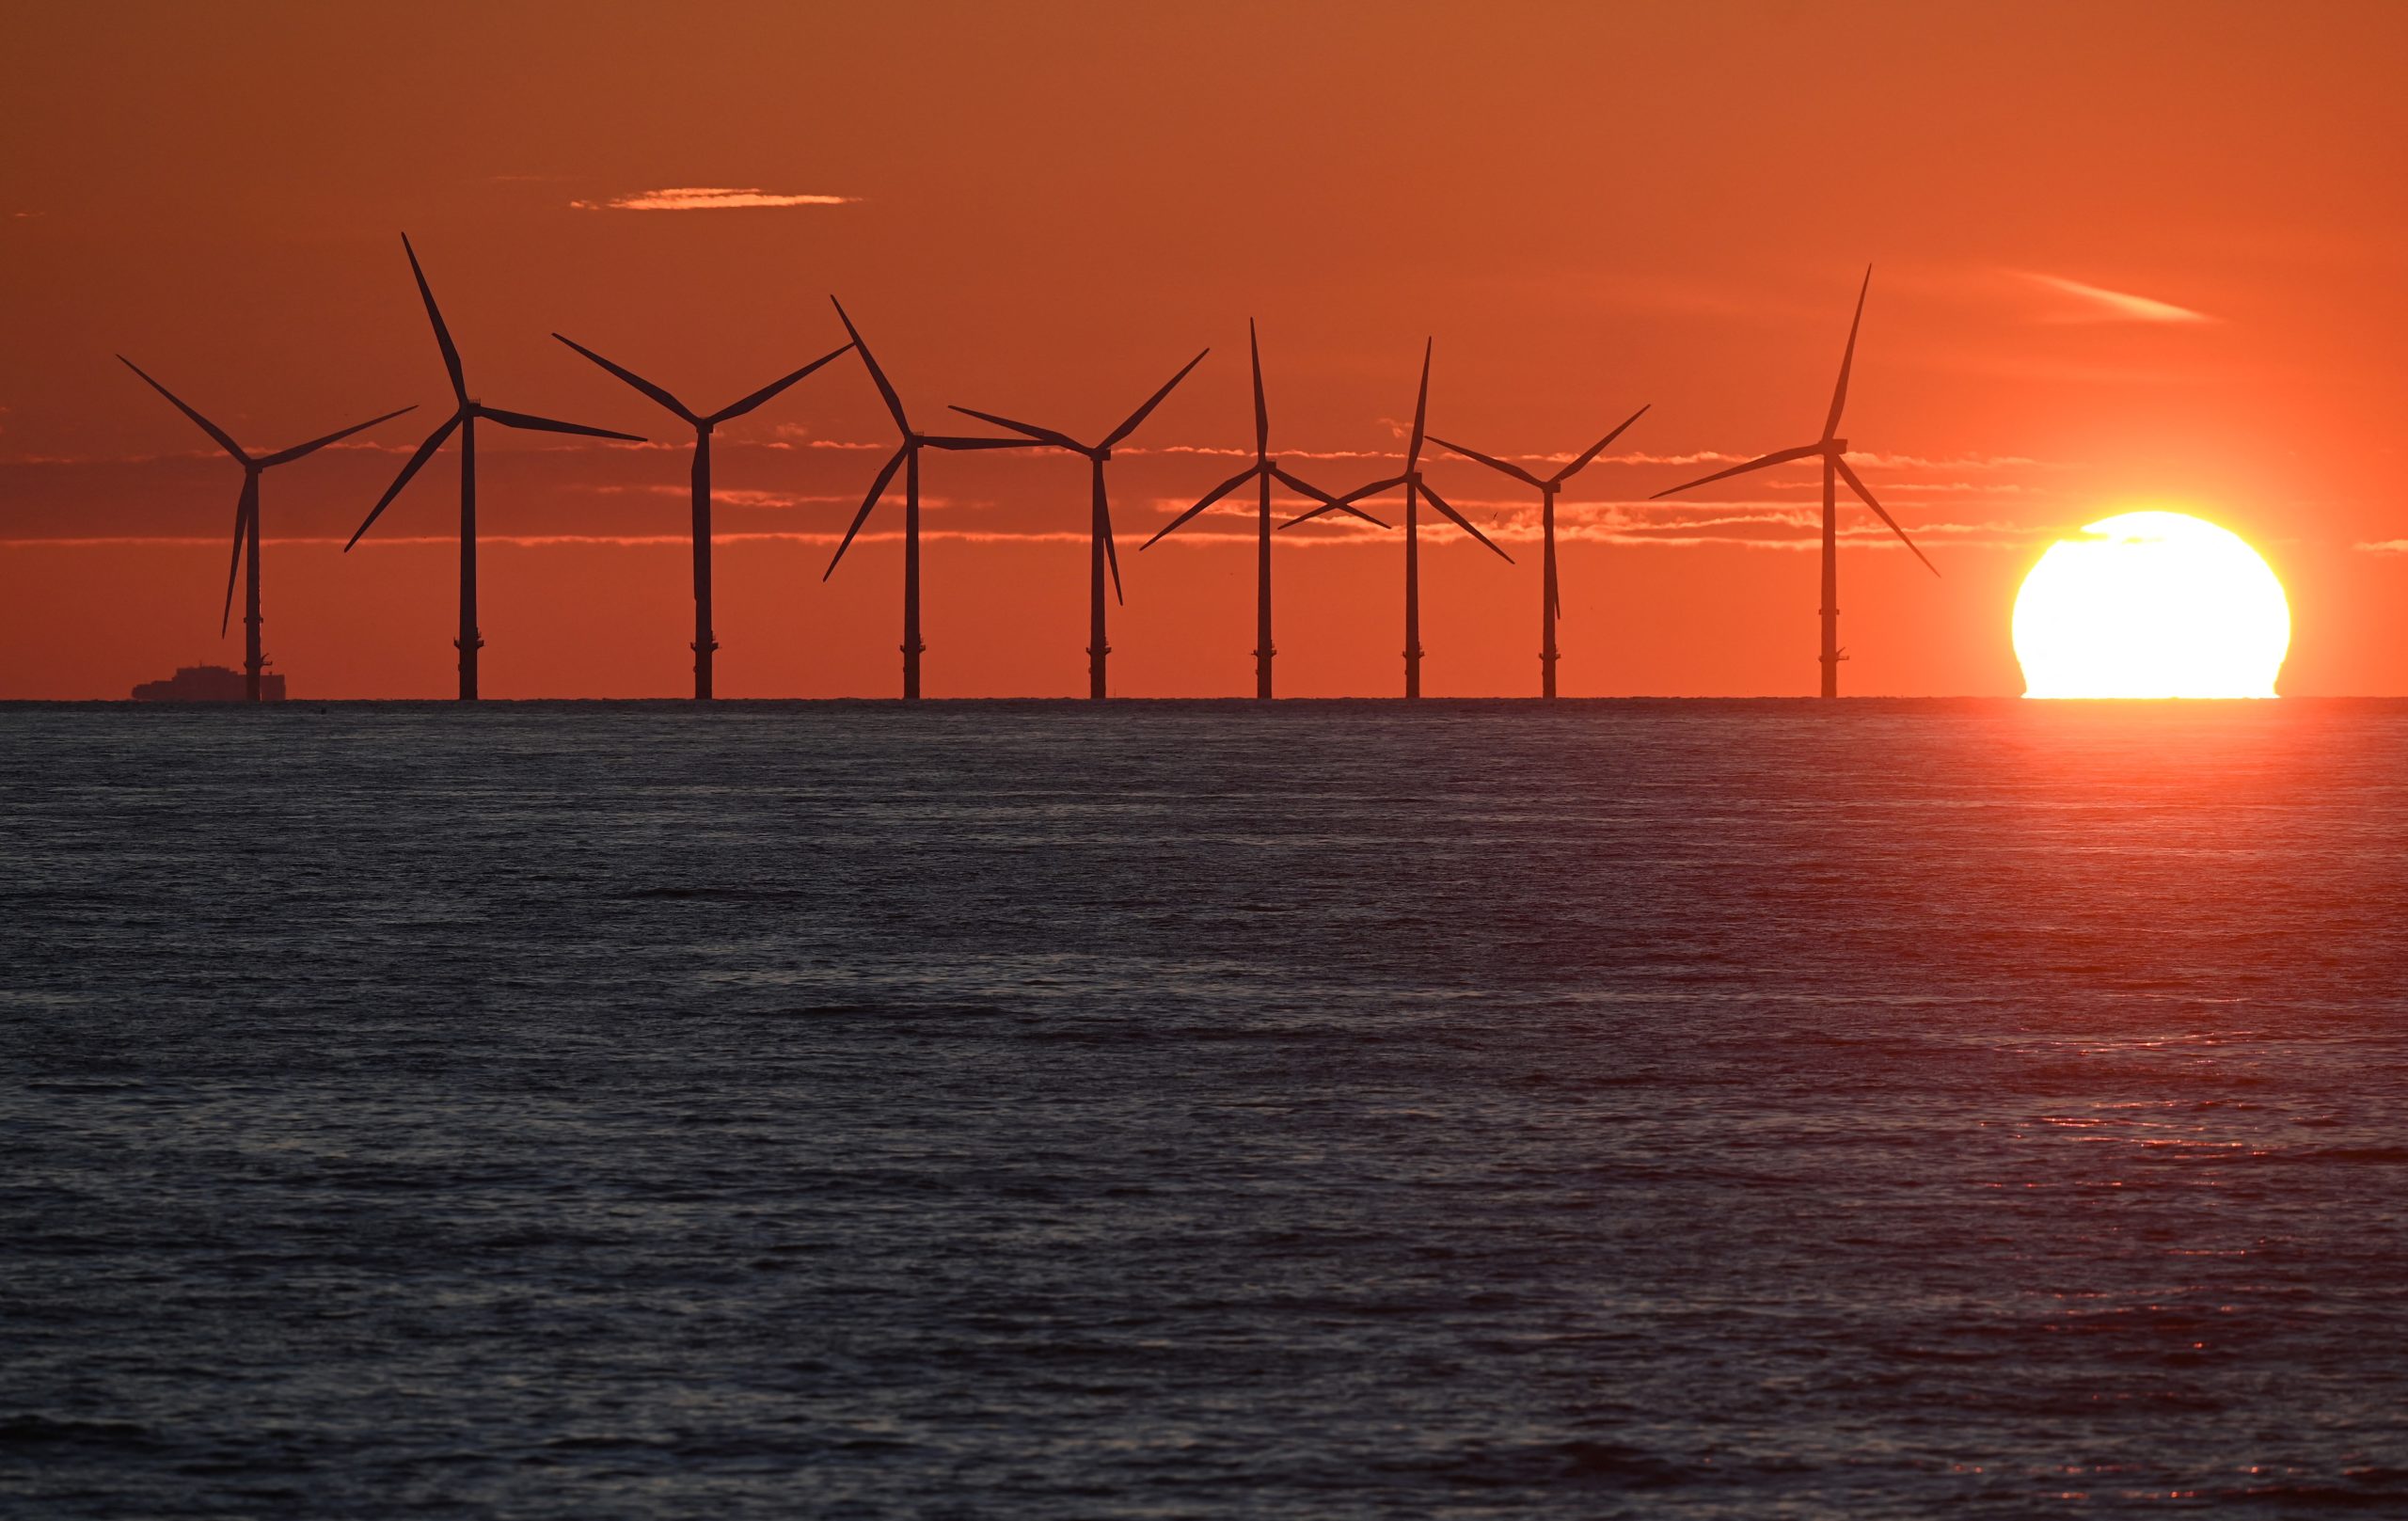 North Sea’s wind farm capacity will triple to 5,8 GW by 2030